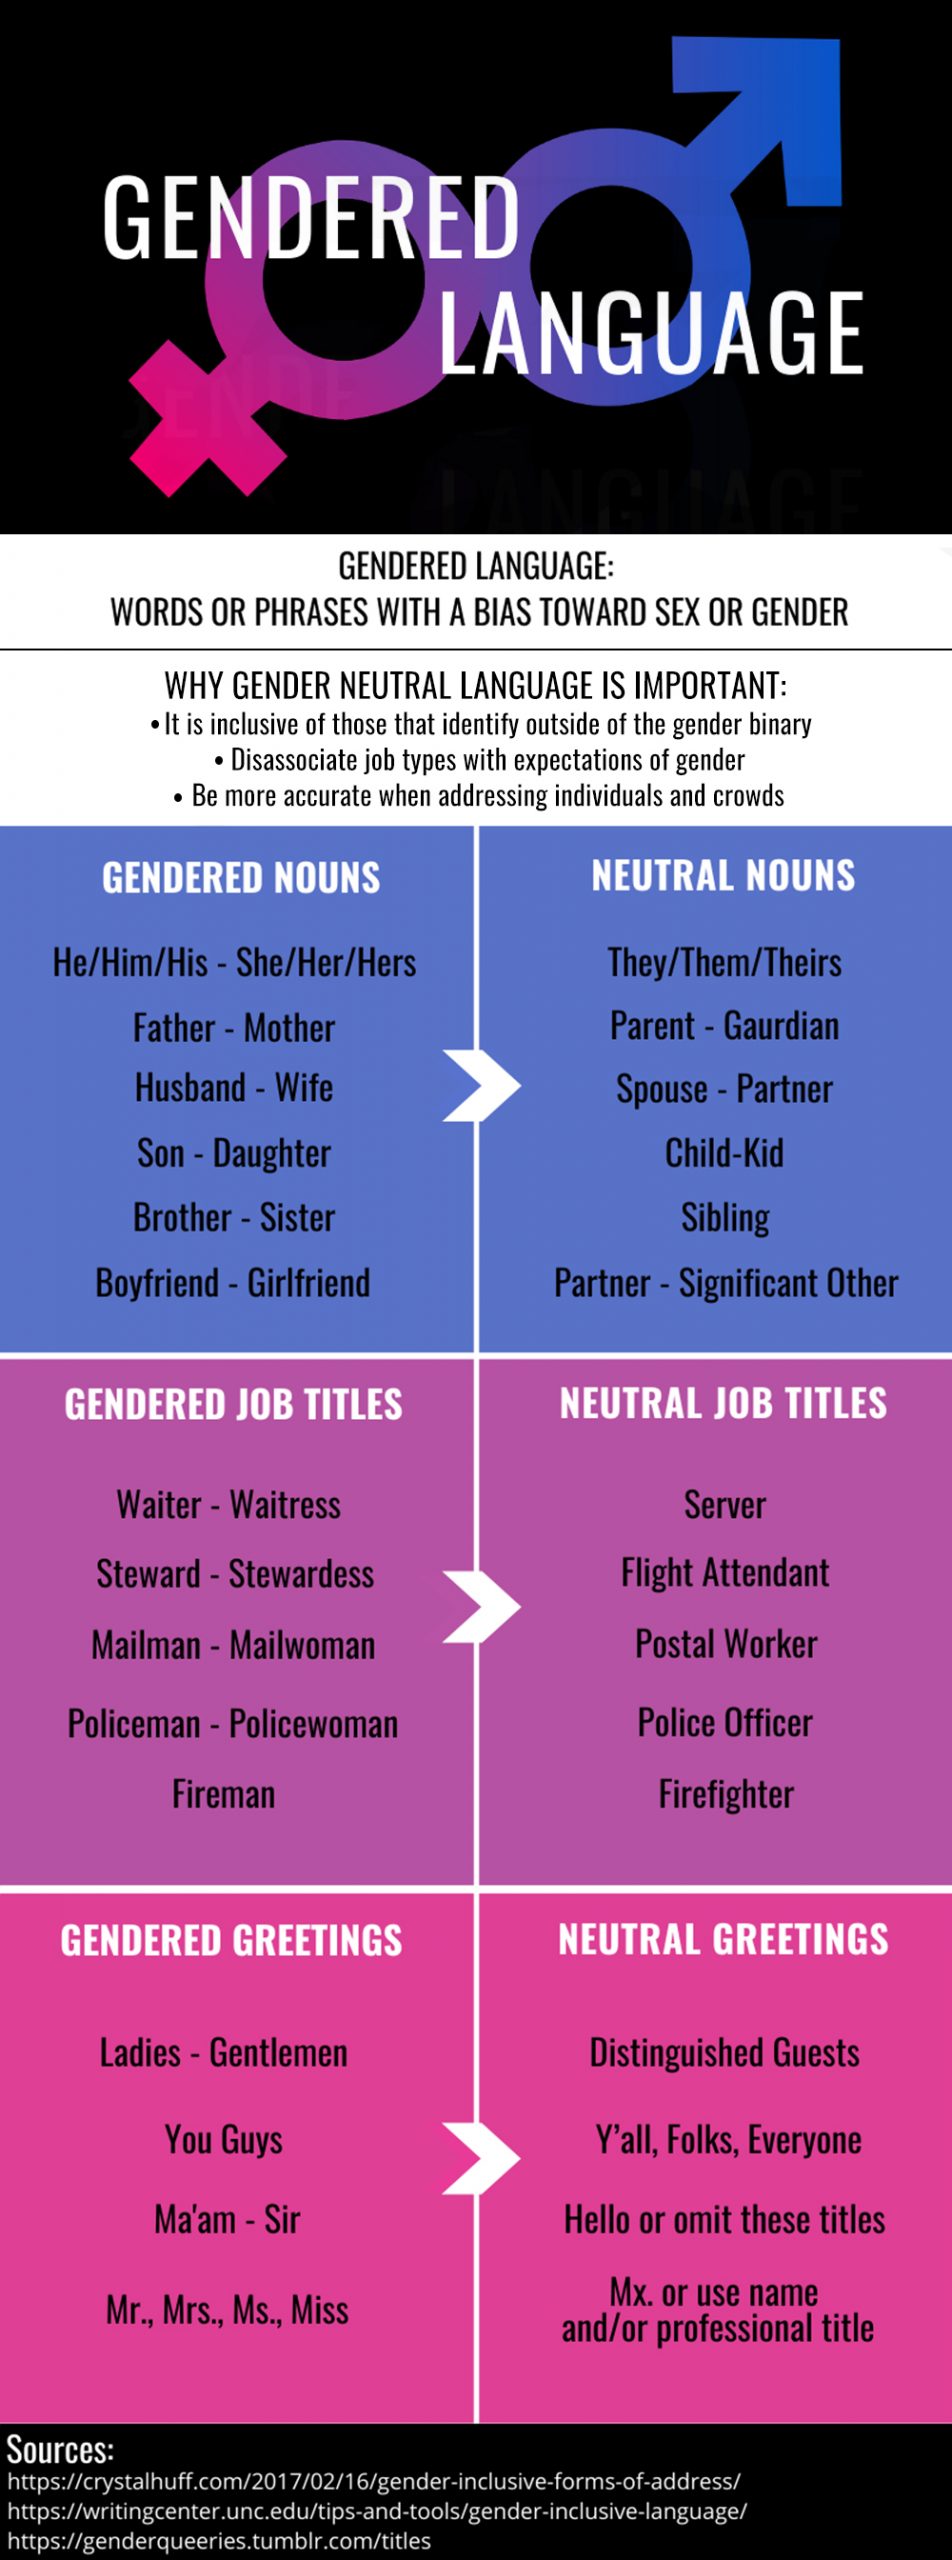 INFOGRAPHIC: Infographic with a graphic image of the female gender symbol of the left and the male gender symbol on the right. The symbols are a gradient of pink, purple then blue which symbolizes the fluidity of the binary spectrum. The text that is overlaid on those symbols are the words 'Gendered Language' in white. The text and symbols are on a black background. There is a section that explains what gendered language is and why it is important. It contains a list of gendered terms and gender neutral terms for those who do not identify within the gender binary. There is a blue rectangle containing gendered nouns and neutral nouns. A purple rectangle containing gendered job titles and neutral job titles. Finally, a pink rectangle gendered greetings and neutral greetings. Infographic by The Signal reporter Amanda Weidle.